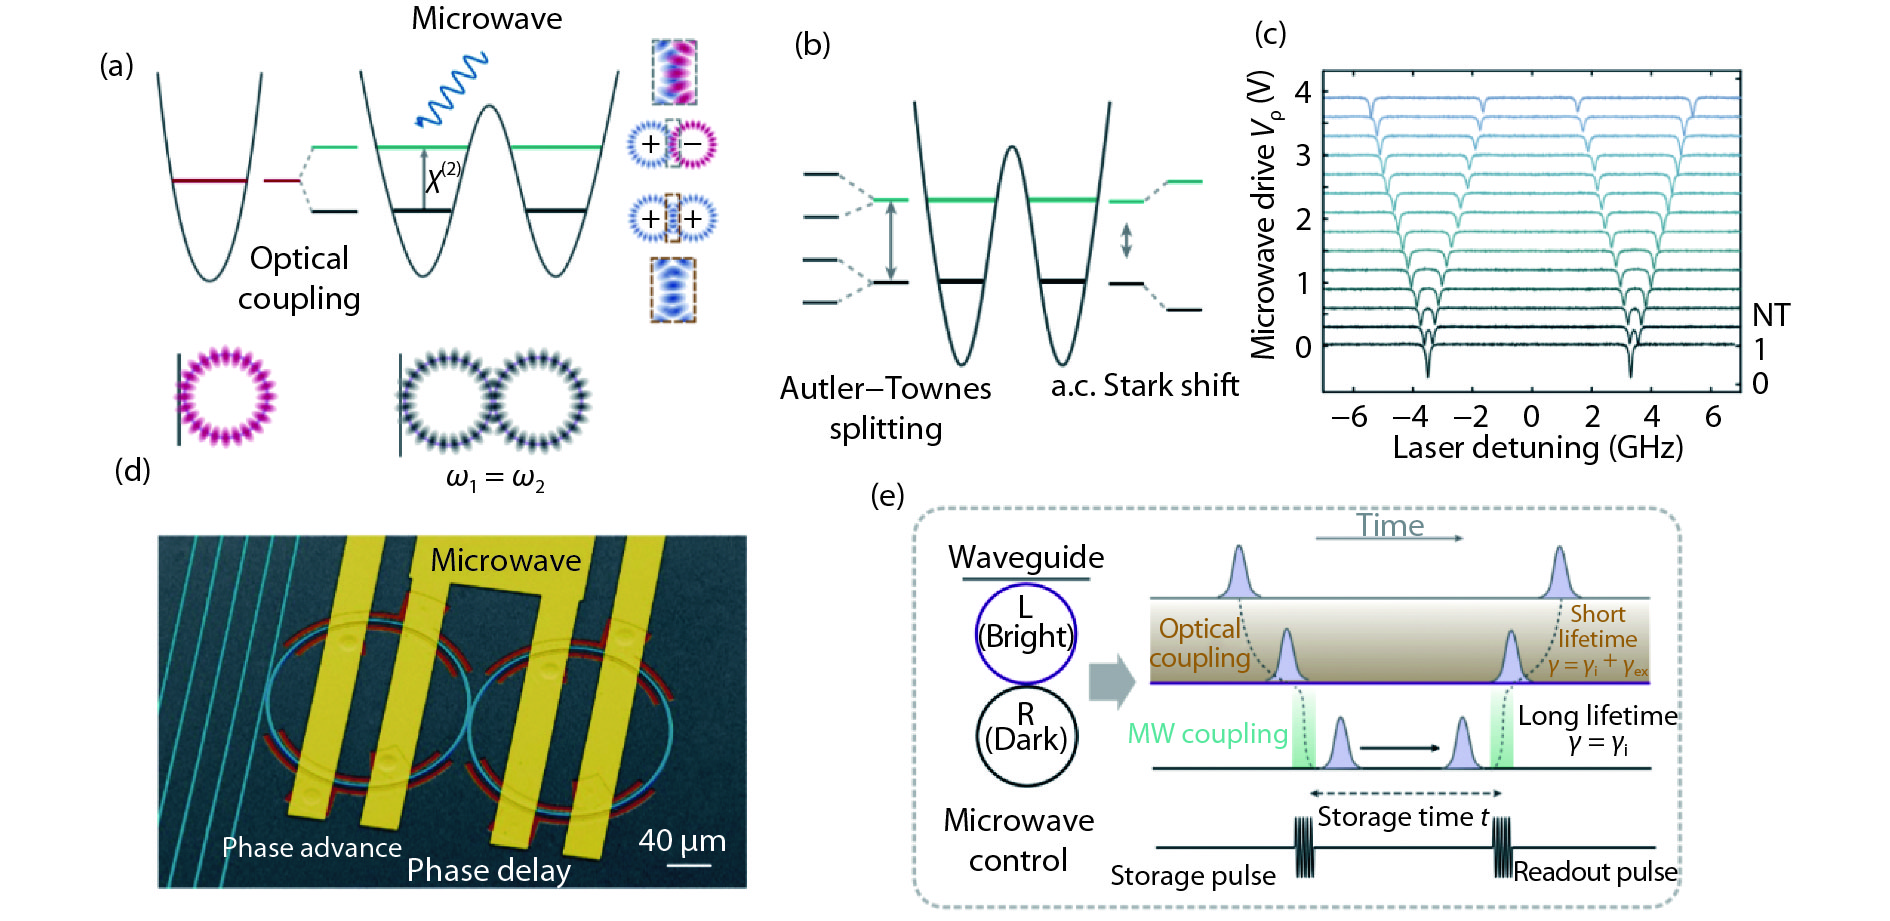 (Color online) Microwave-dressed photonic module. (a) The photonic molecule is realized by a pair of identical coupled optical microring resonators (resonant frequency ω1 = ω2). The system has two distinct energy levels—a symmetric and an antisymmetric optical mode. (b, c) When the applied microwave frequency is tuned to match the mode separation, dissipative coupling leads the two photonic levels to split into four levels. This effect is analogous to Autler–Townes splitting. (d) False-coloured scanning electron microscope image of the coupled microring resonators. (e) On-demand storage and retrieval of light using a photonic dark mode. Figure adapted from Ref. [10].